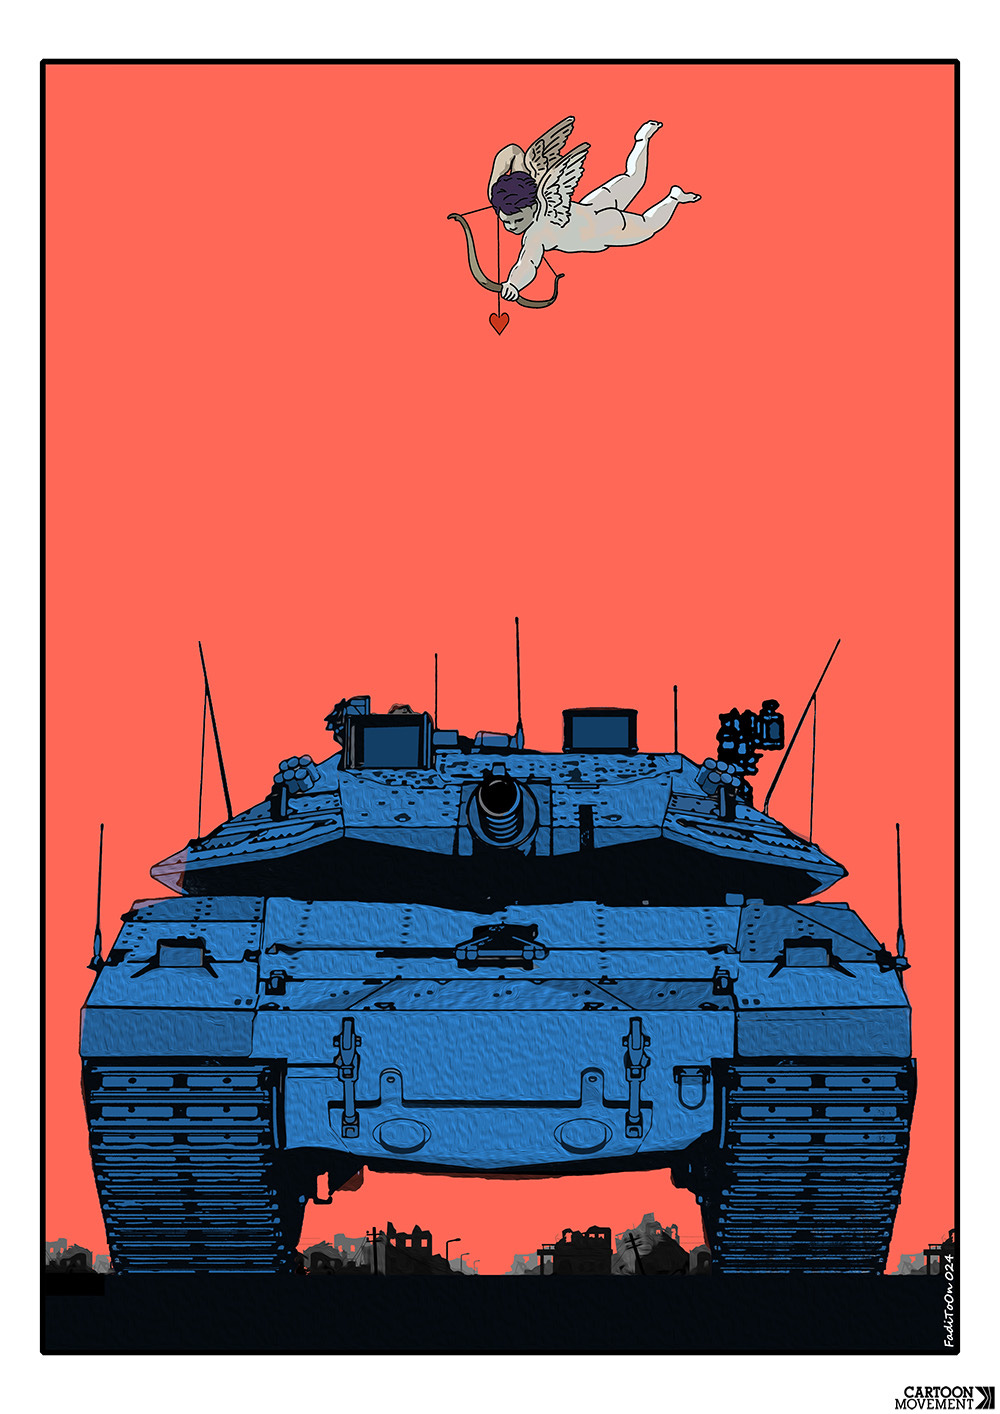 Cartoon showing a large tank with a small cupid flying above it, aiming a heart-tipped arrow towards the tanks.